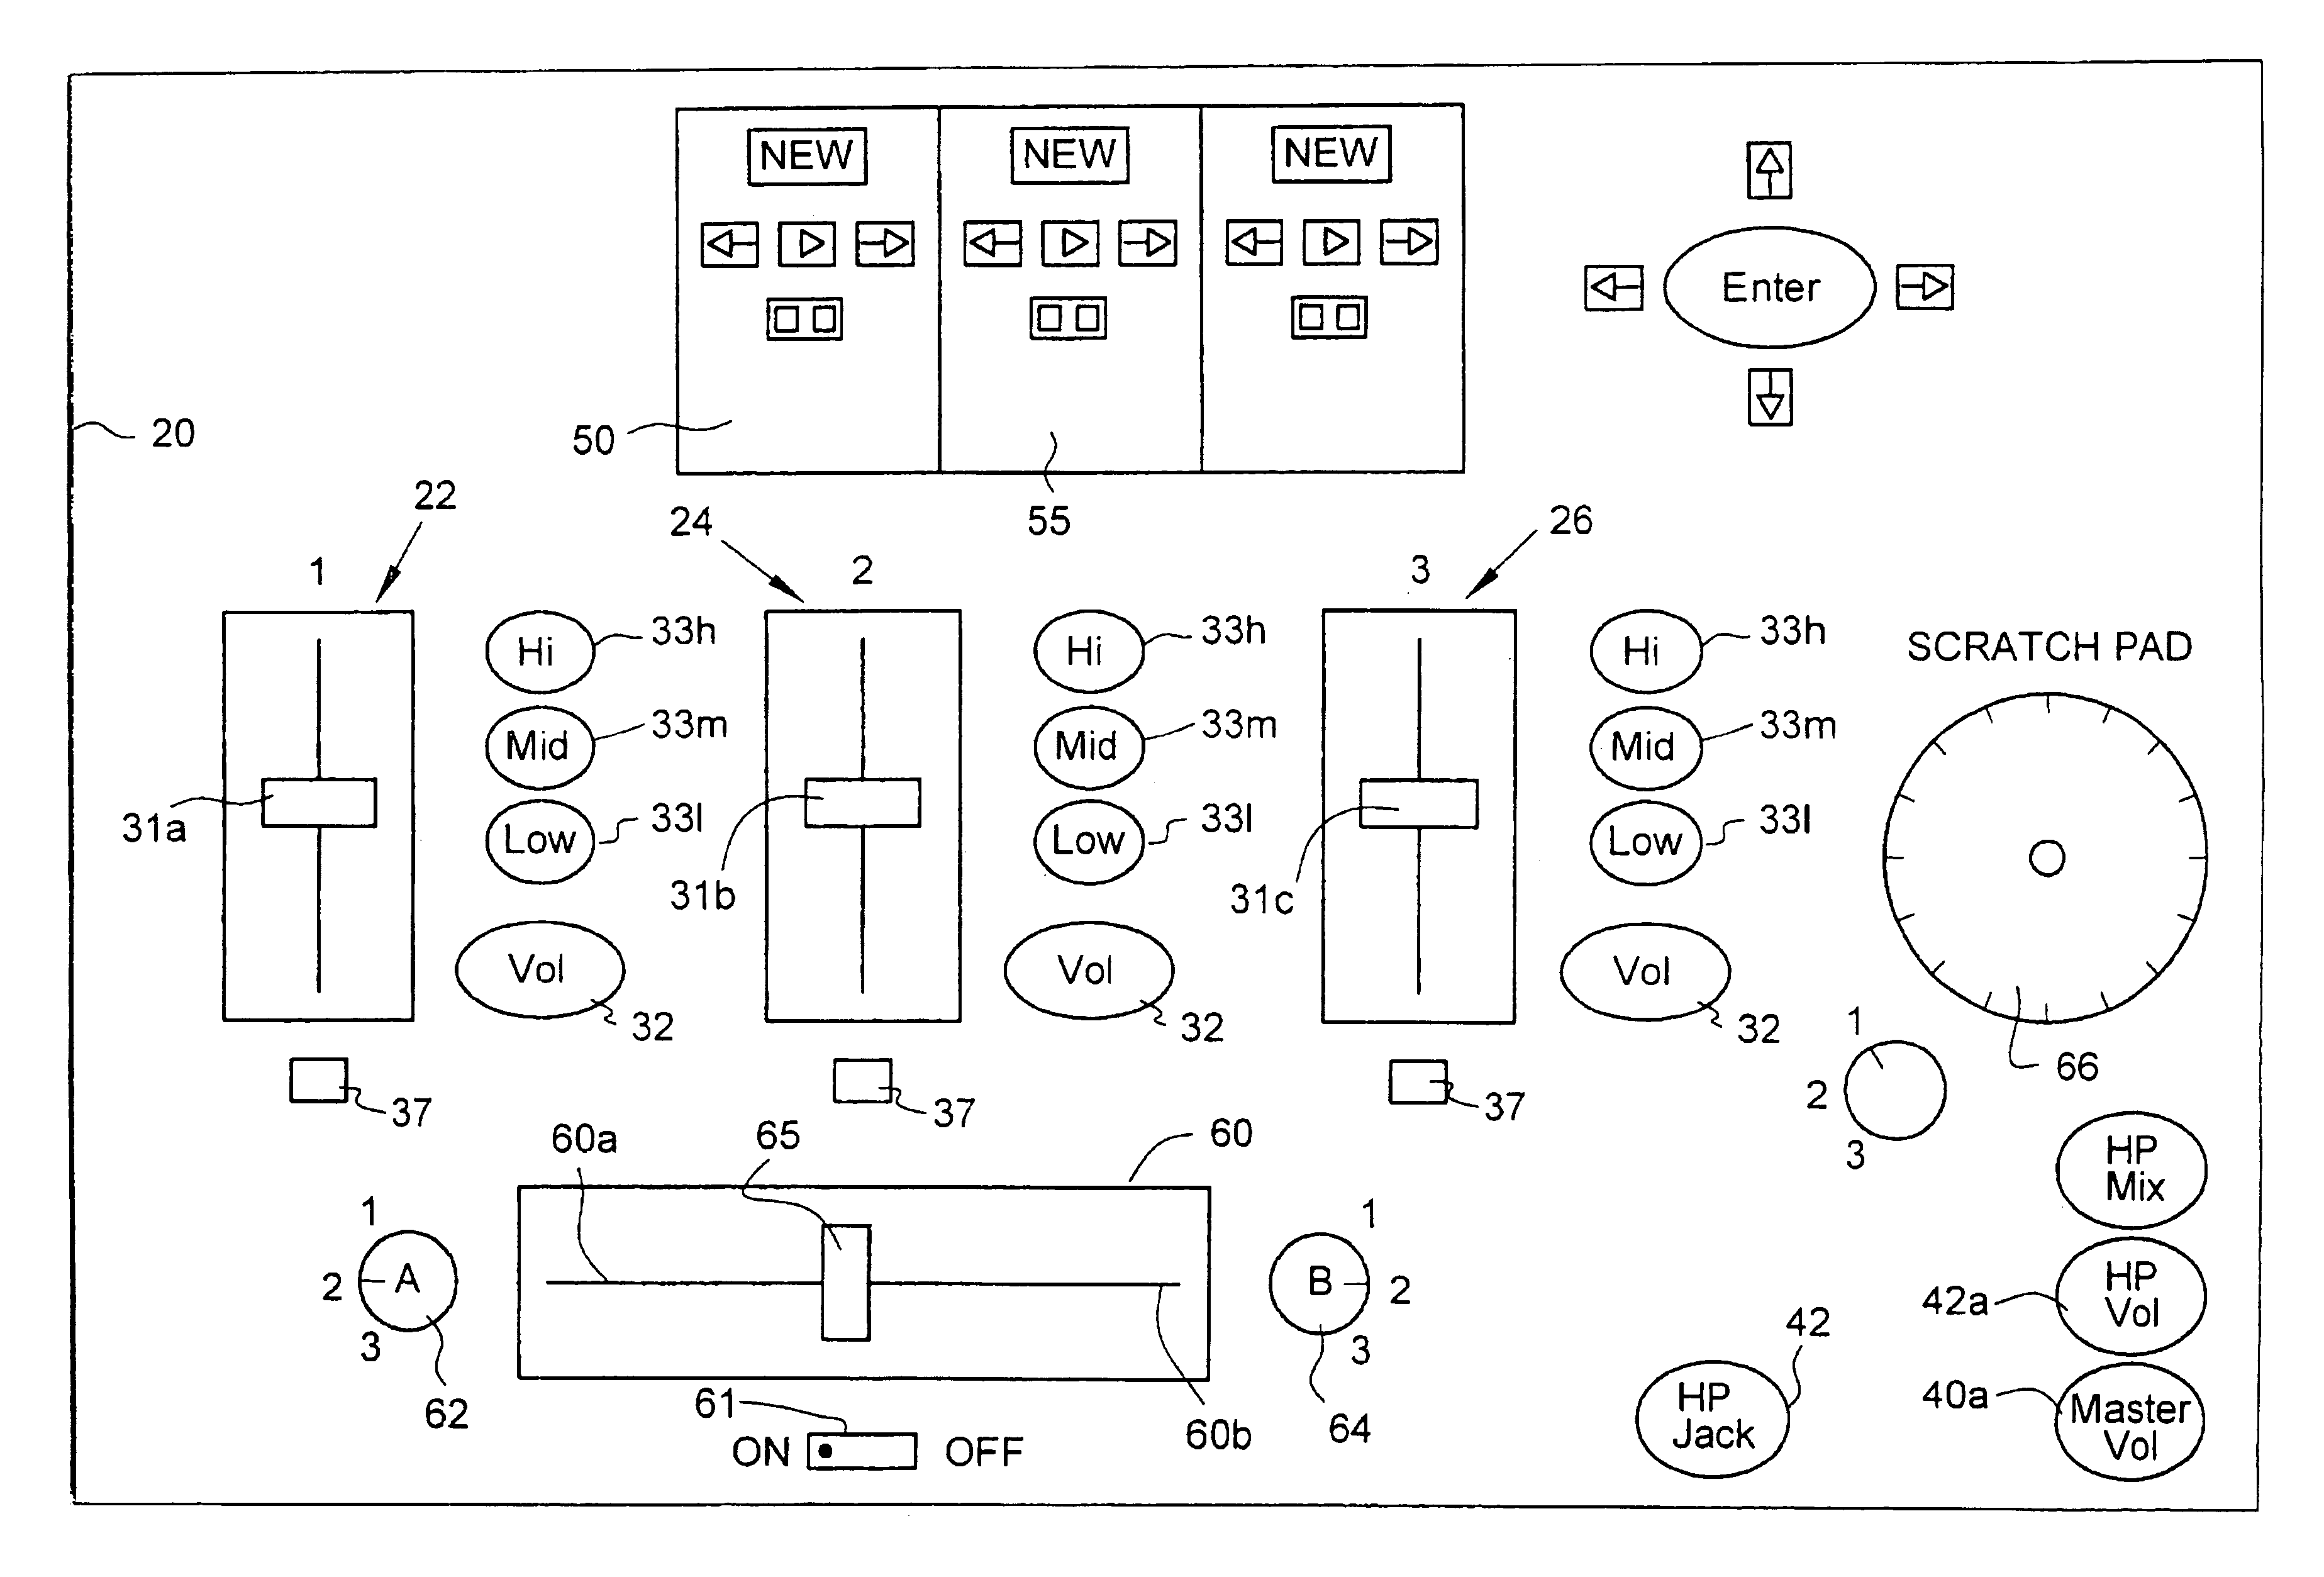 Device using analog controls to mix compressed digital audio data